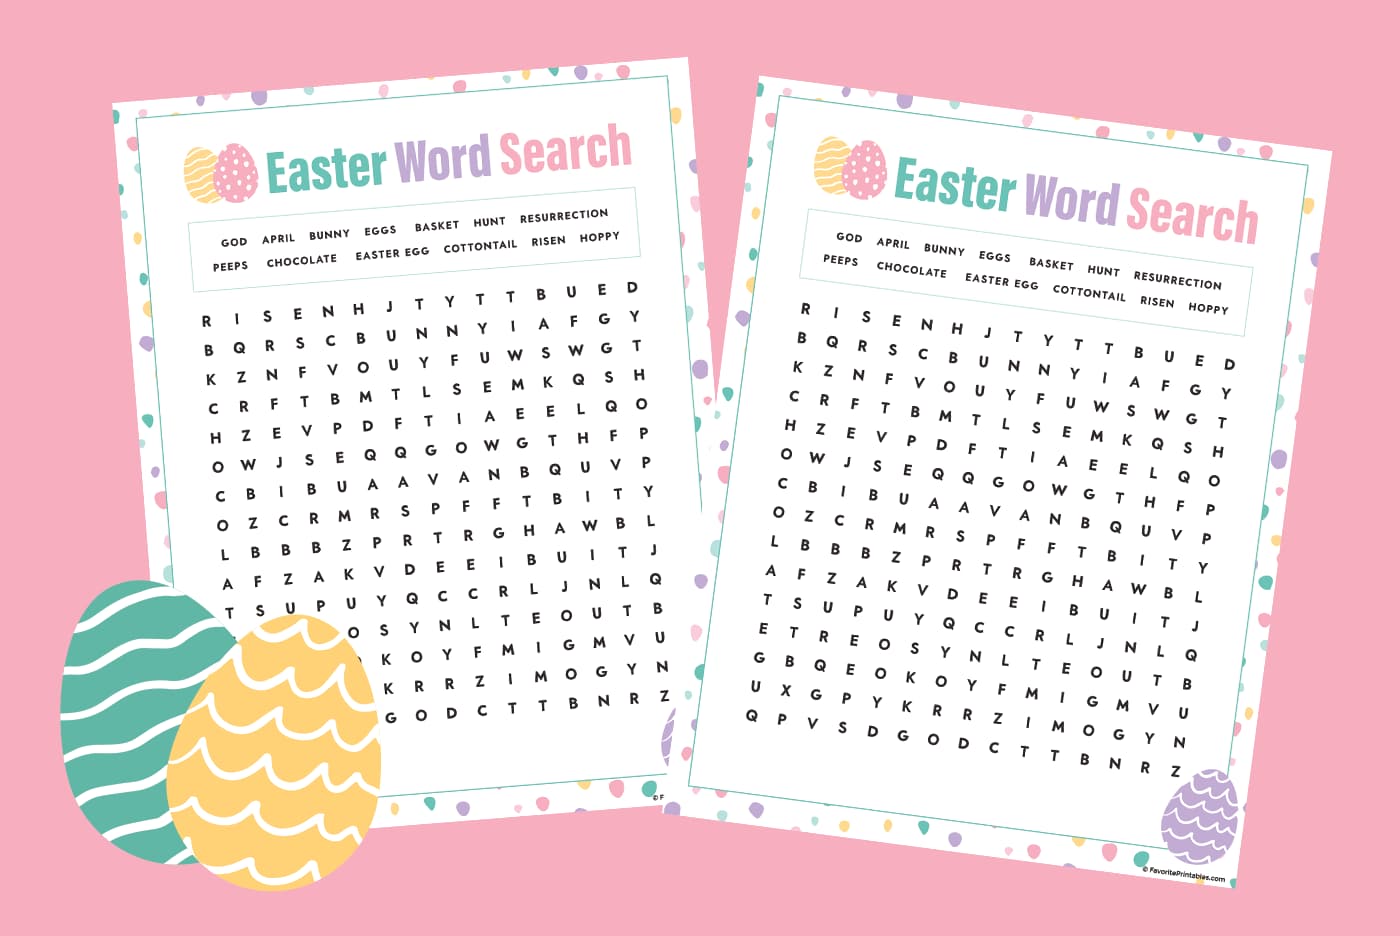 Easter word search printable.